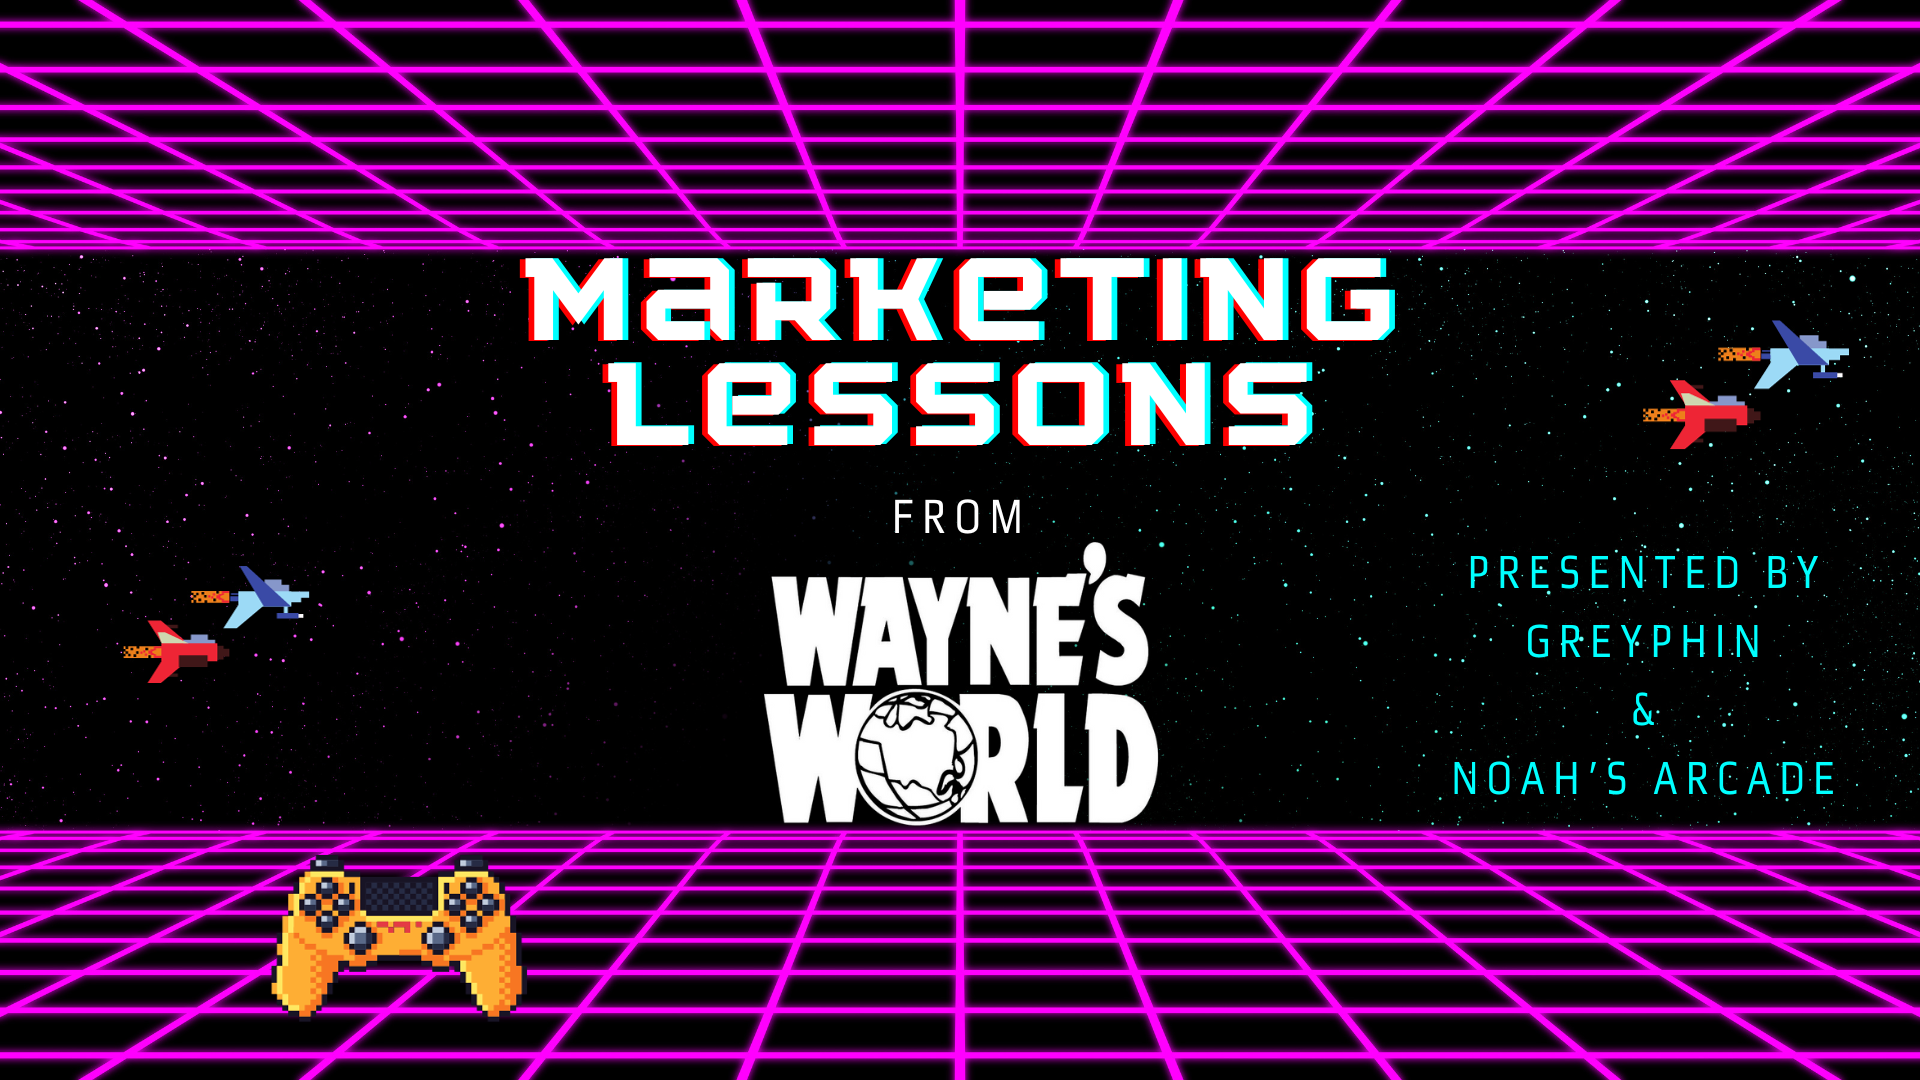 Marketing Lessons from Wayne’s World